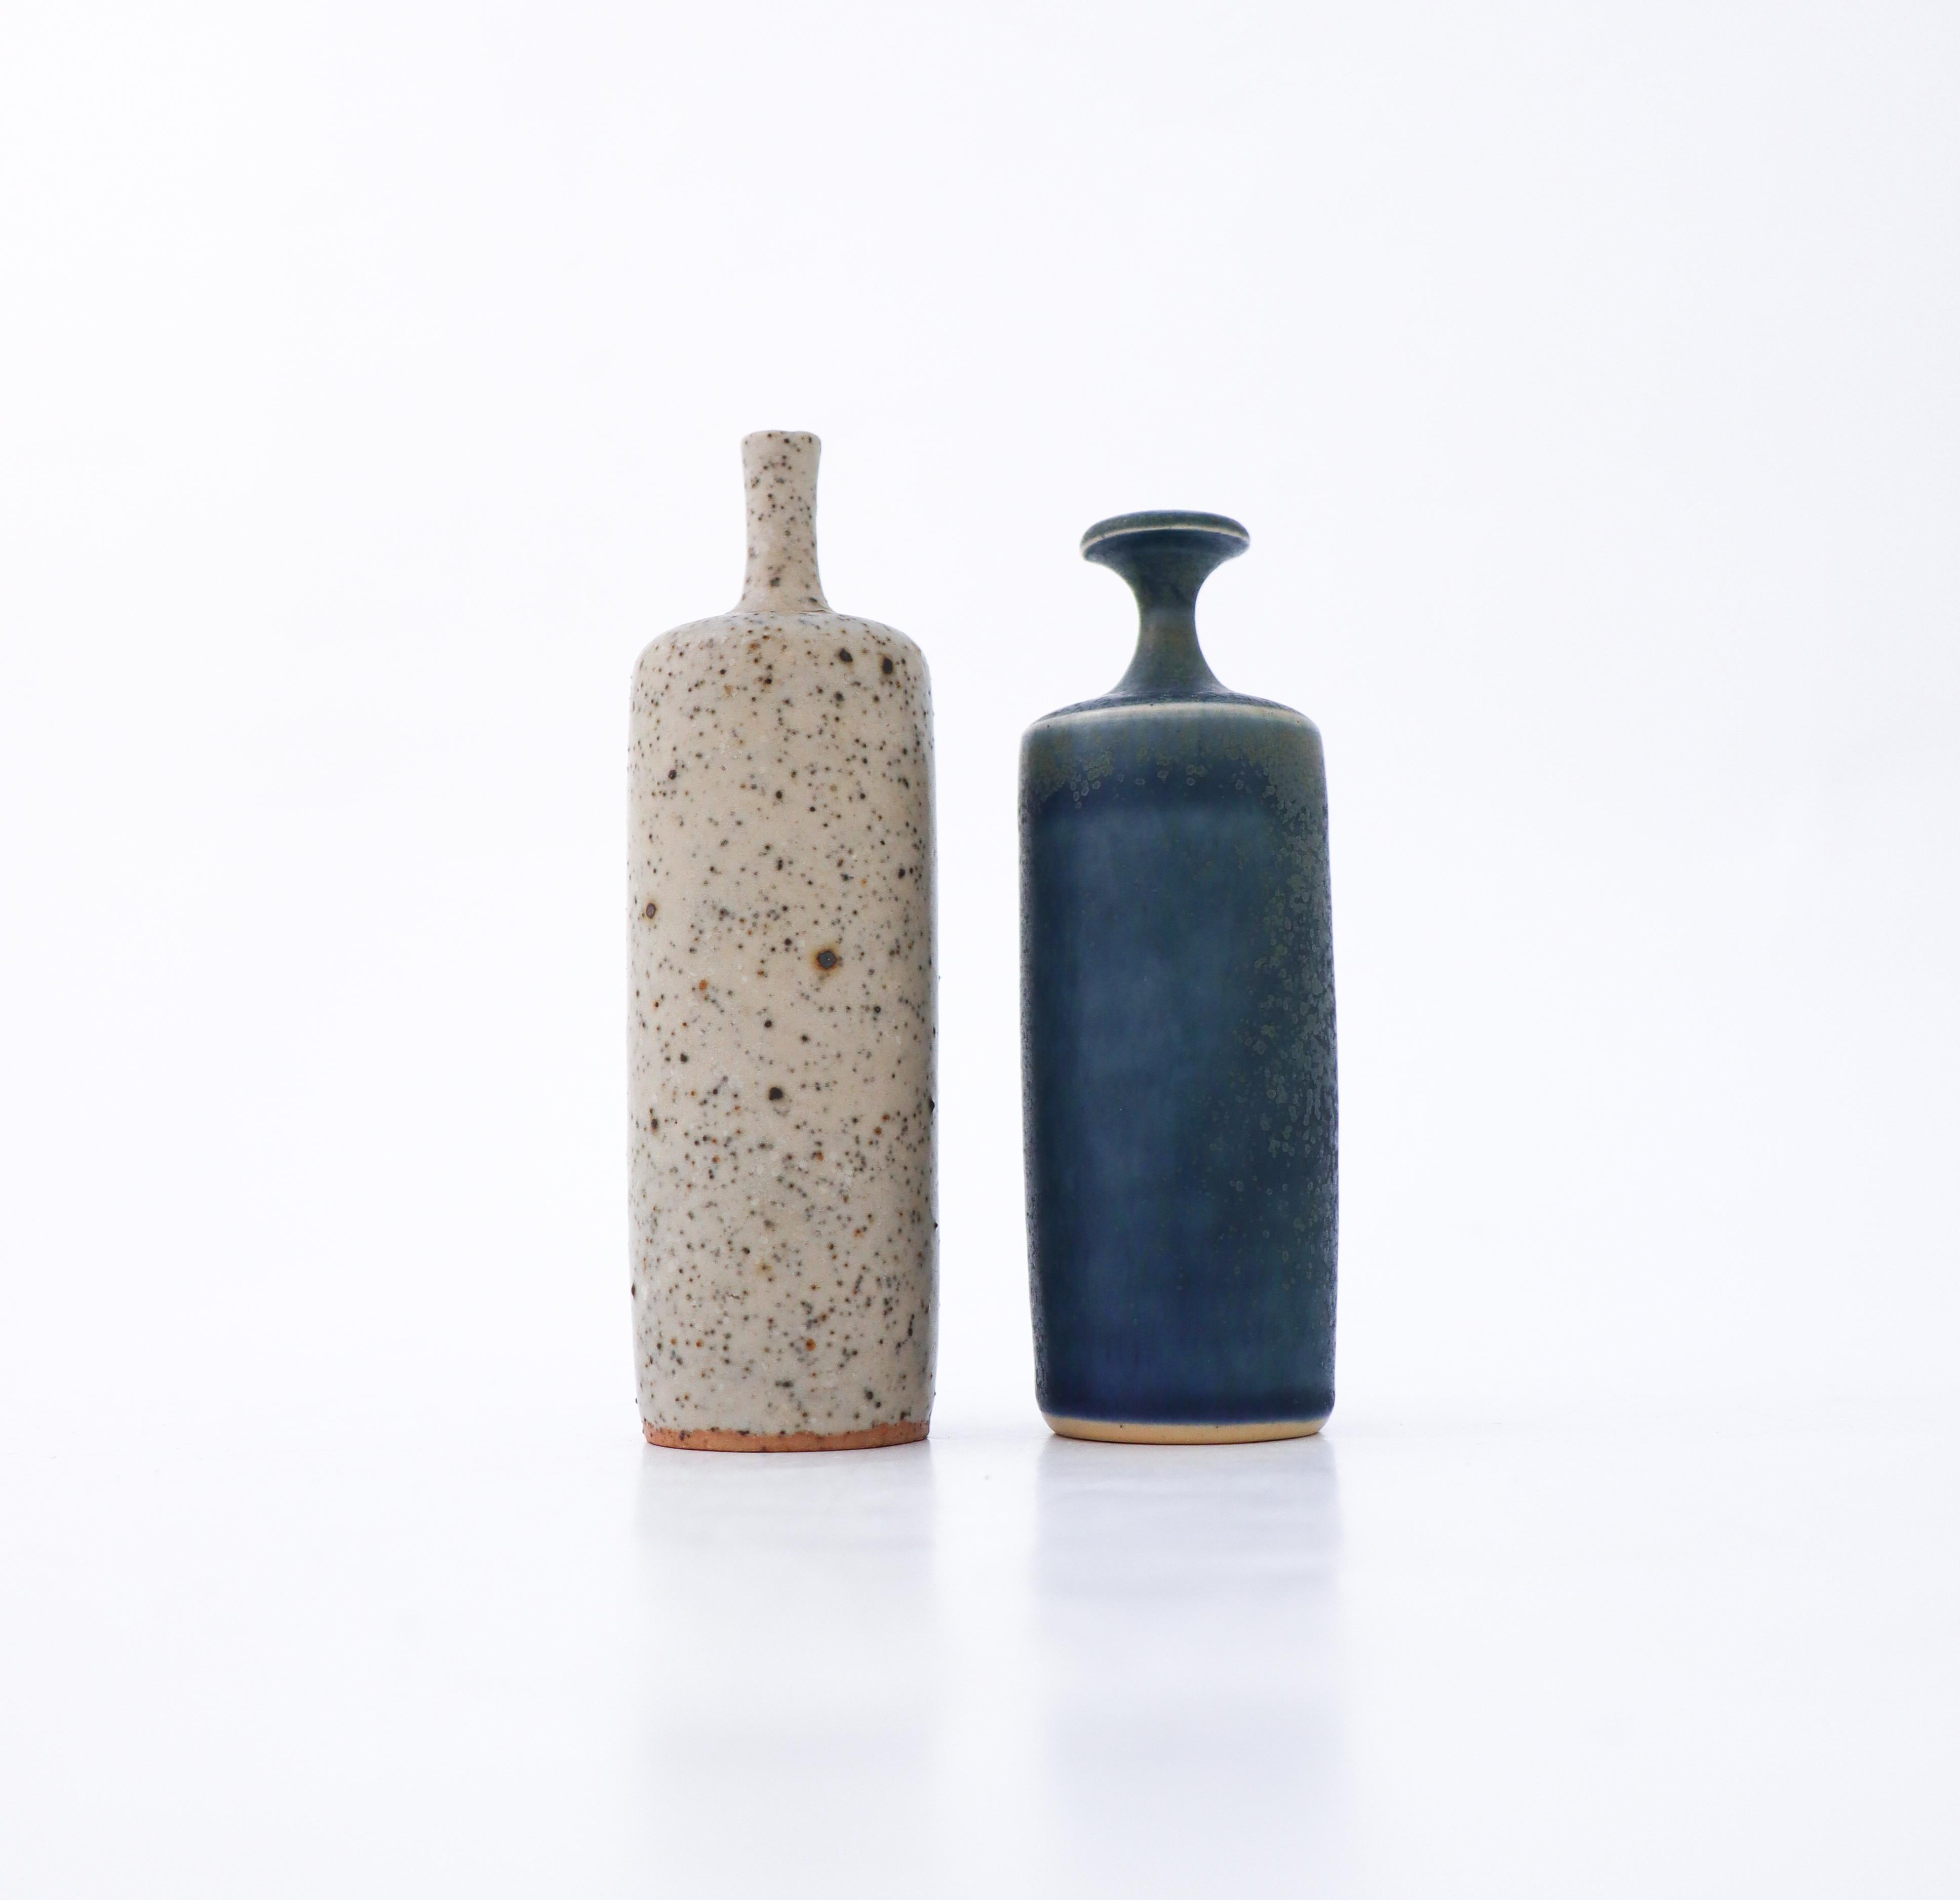 A pair of lovely vases designed by Rolf Palm at his workshop in Mölle outside Höganäs in Sweden, one with a lightgray color with a raw surface and the other one with a blue almost crystalline glaze. The vases are 12 and 11 cm (4.8